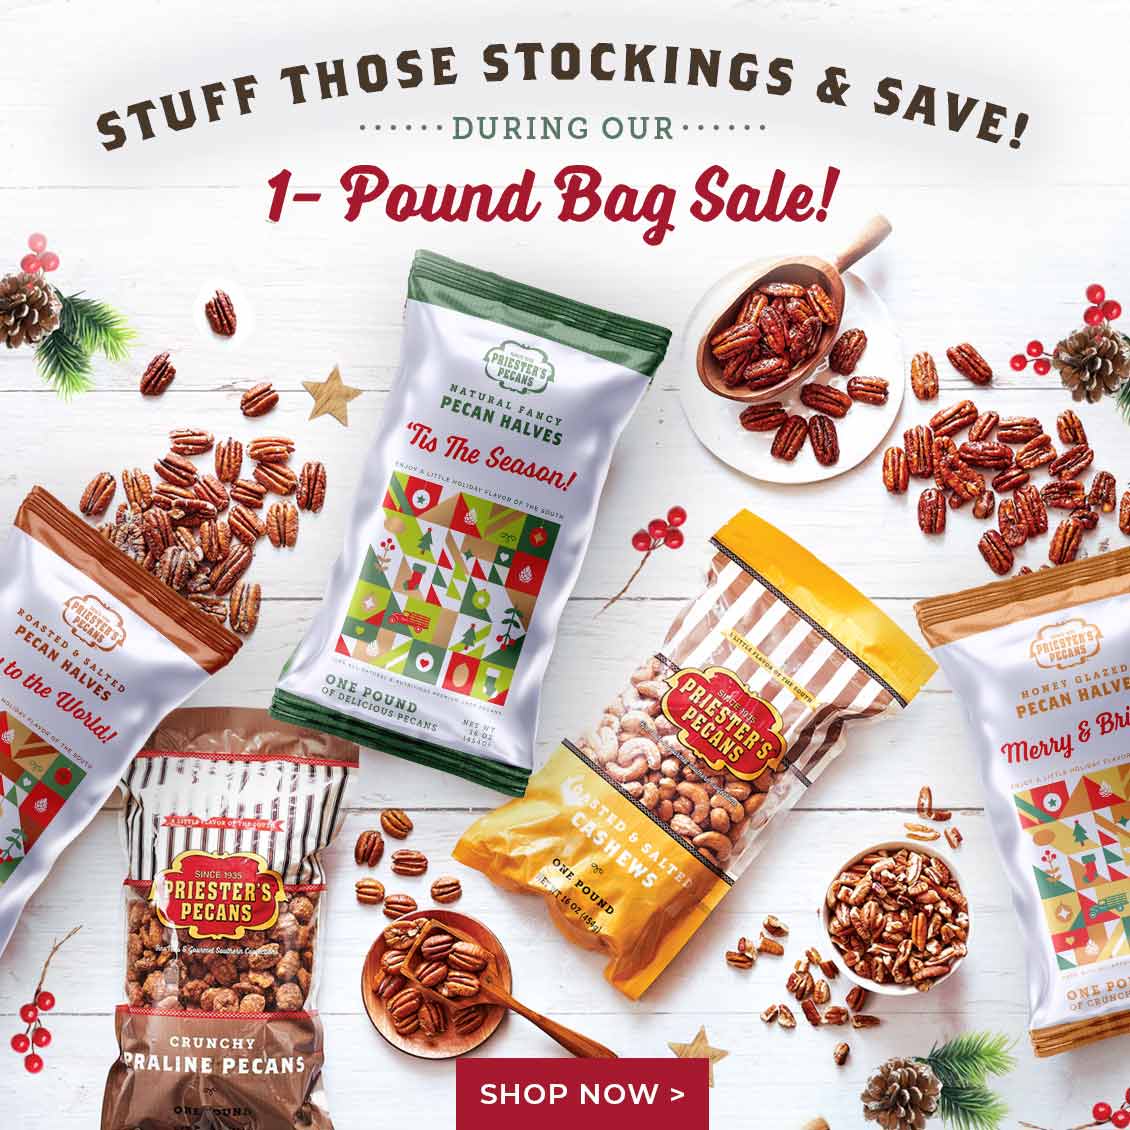 SSave up to 25% during our 1-Lb. Bag Sale!